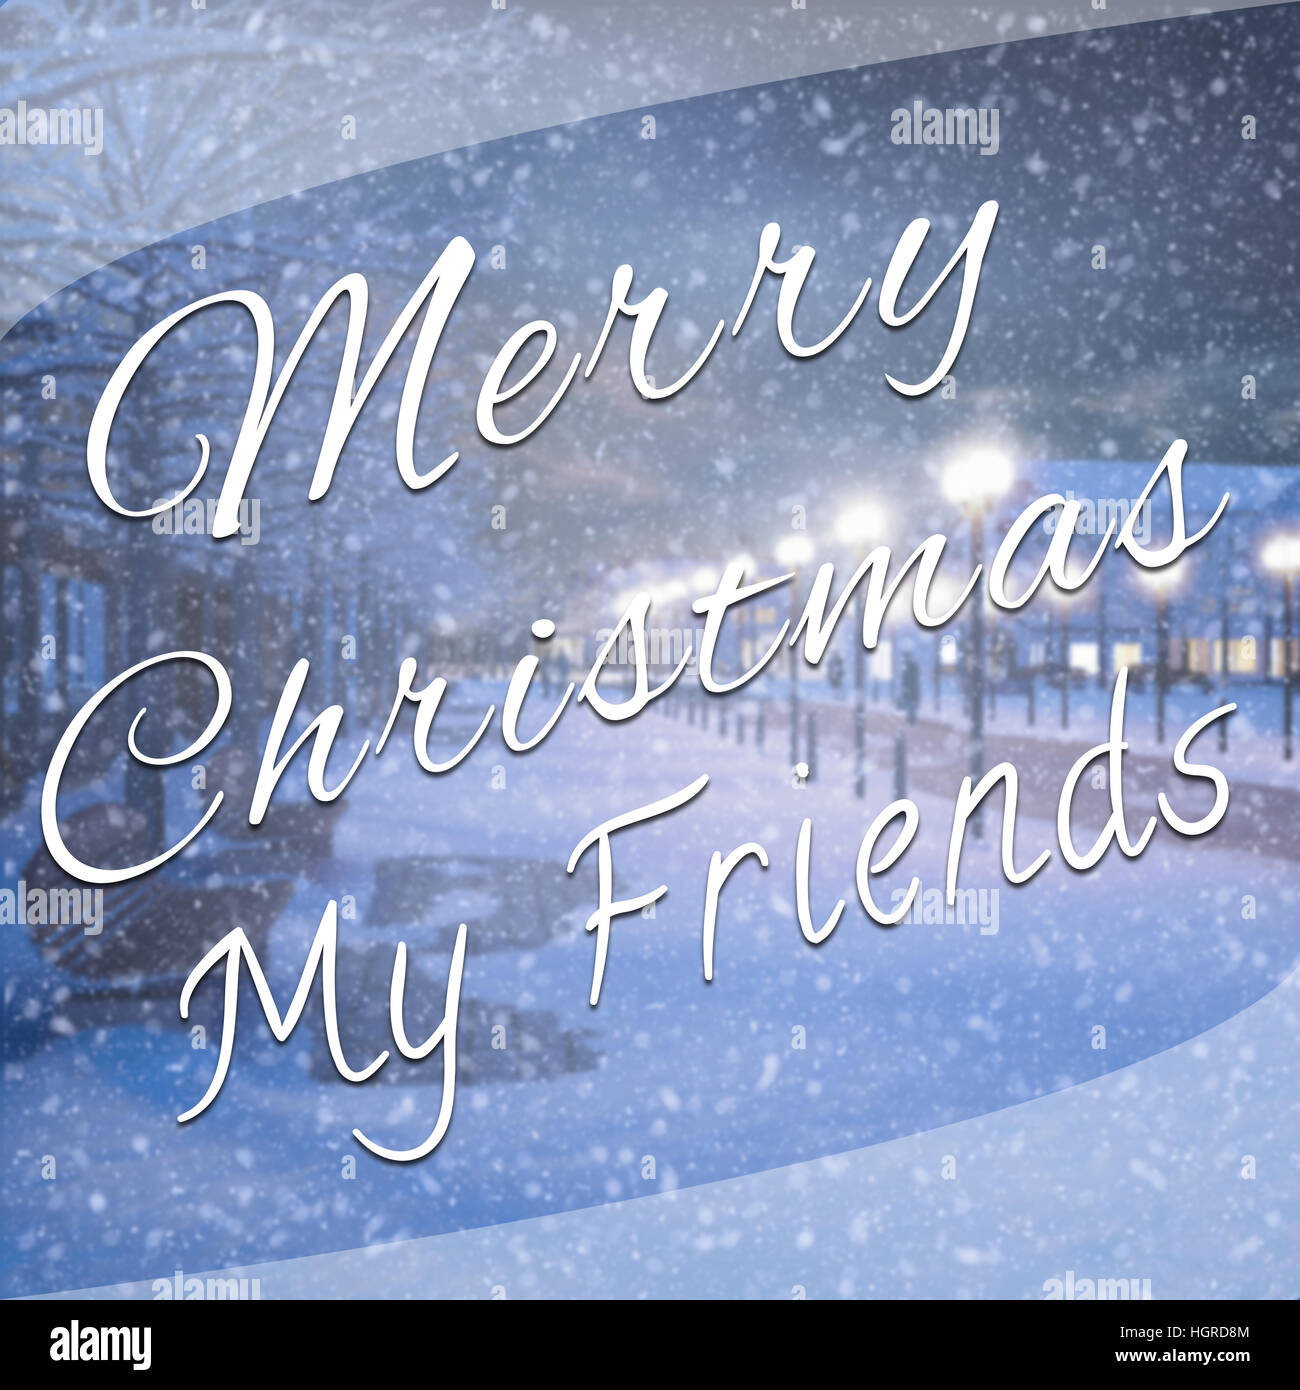 Merry christmas my friends motivational quote on background with winter and  snowflakes Stock Photo - Alamy